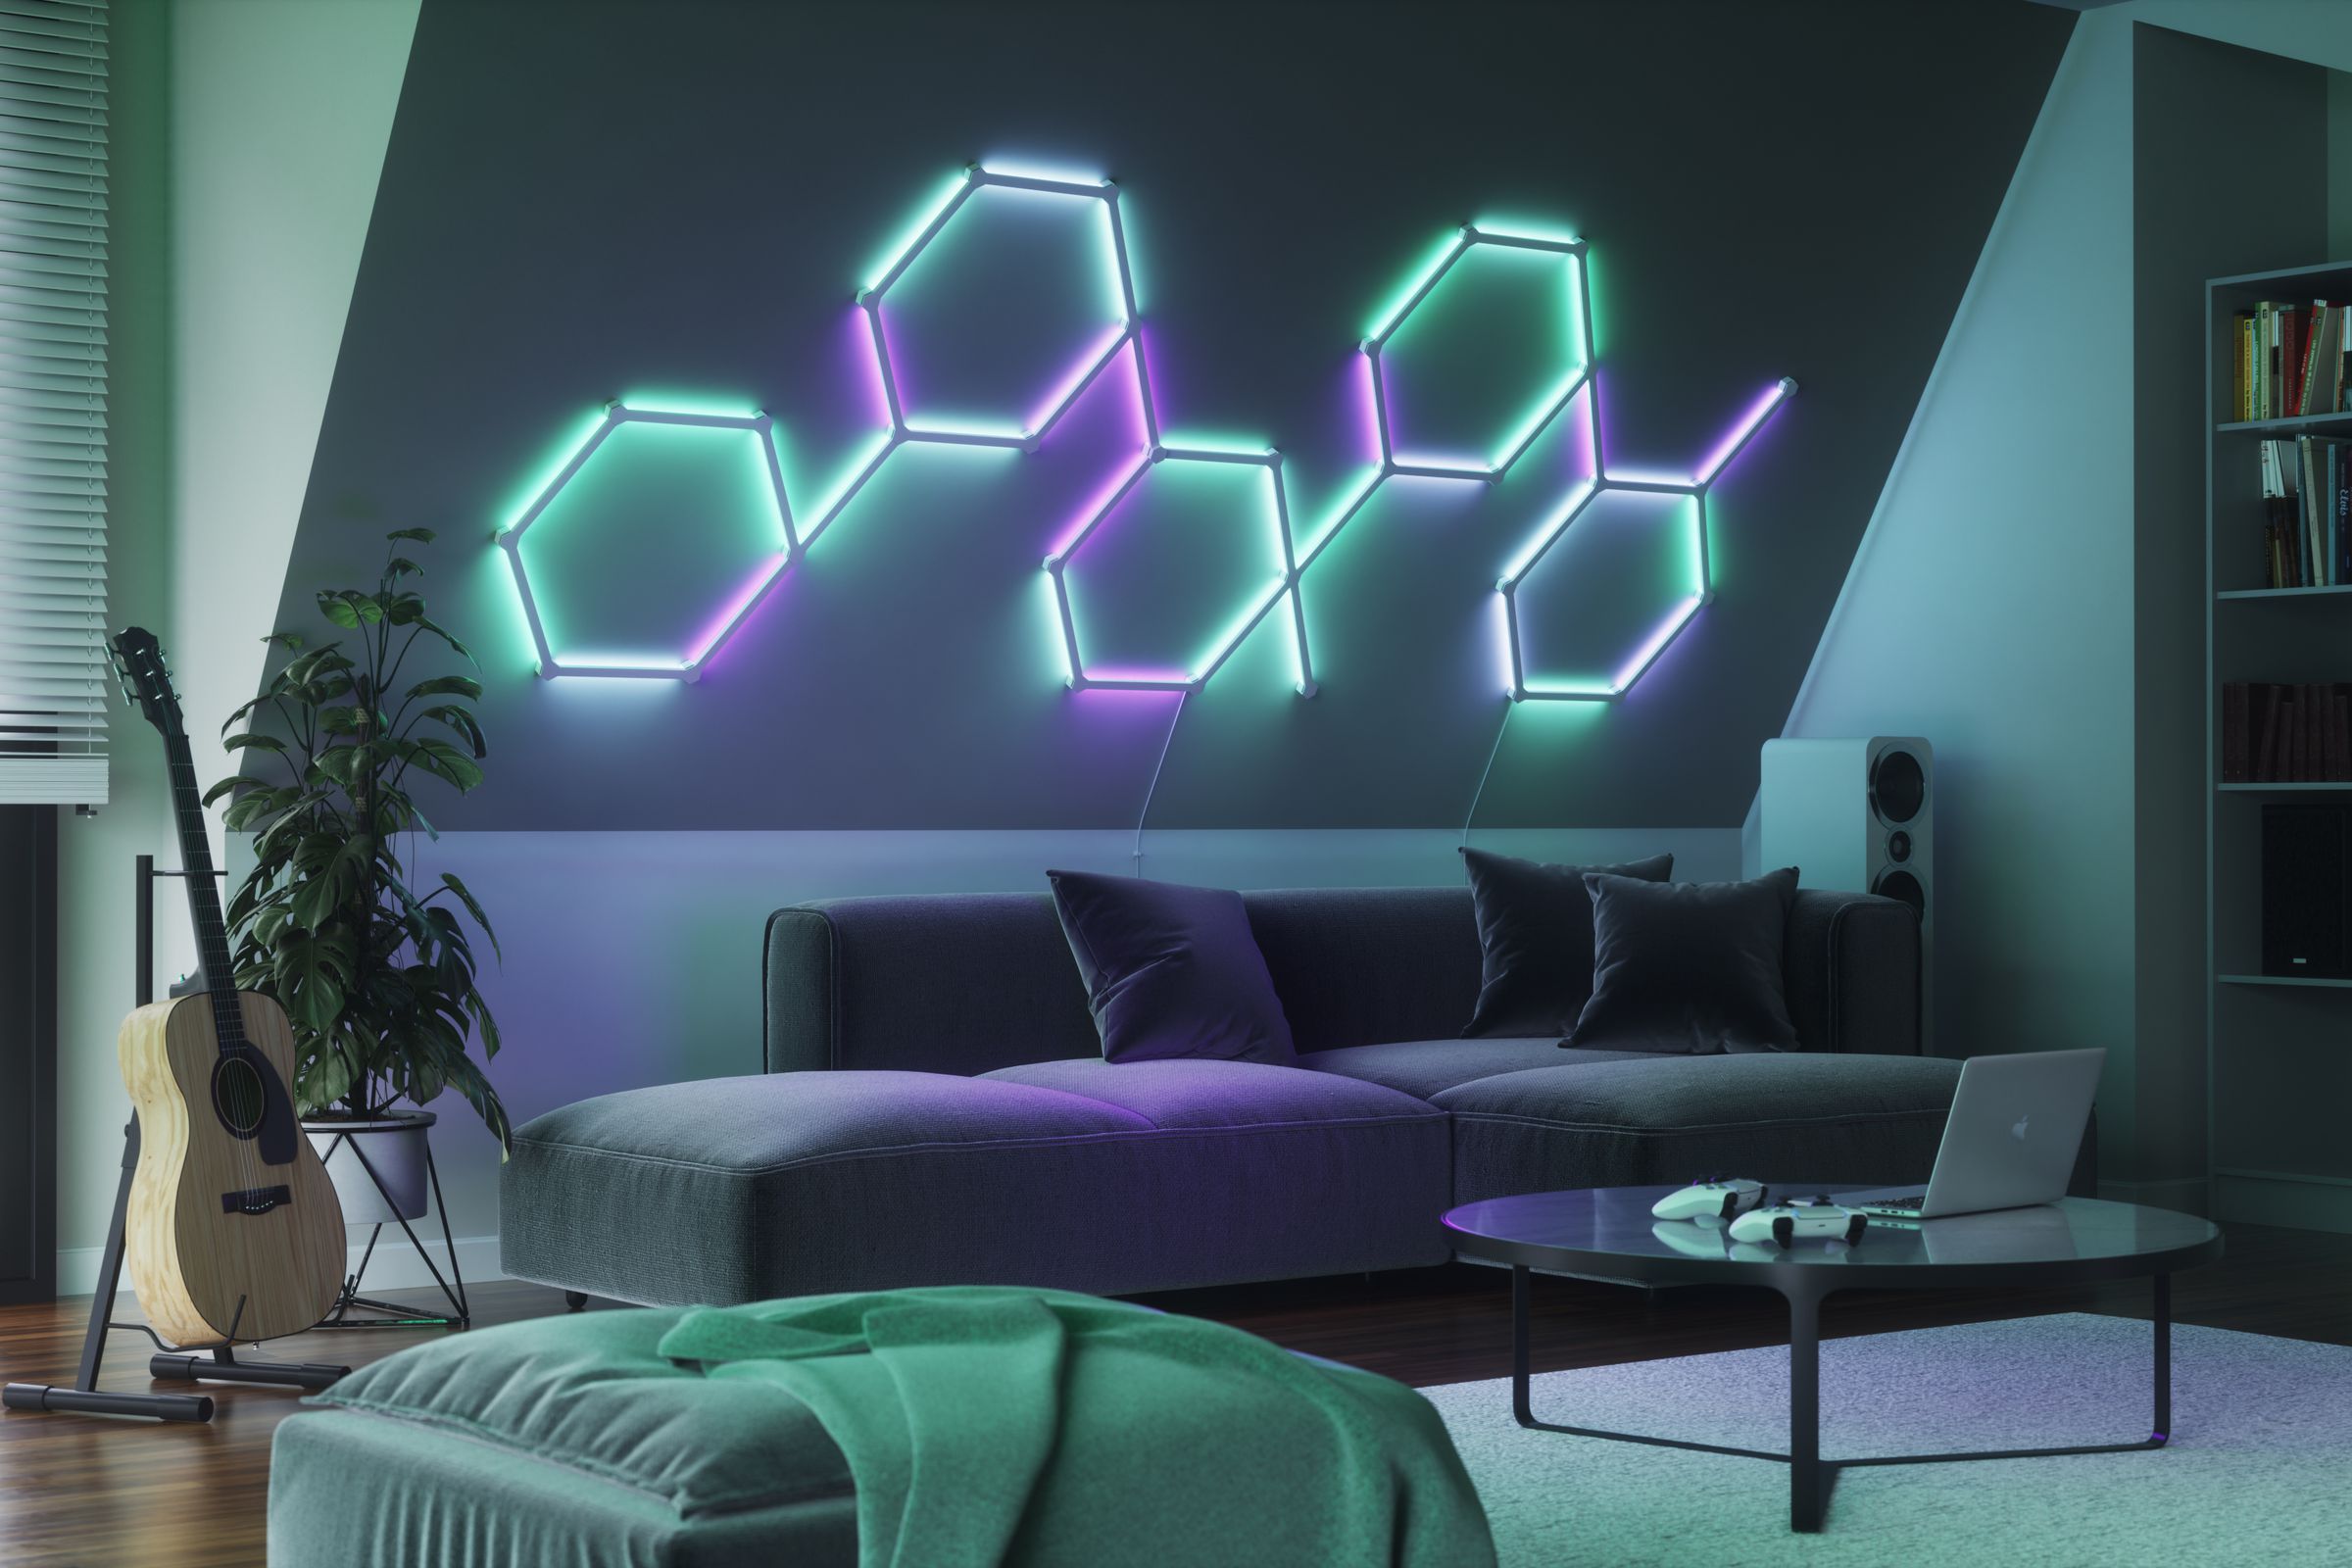 Nanoleaf Lines is the latest product from the smart lighting company.